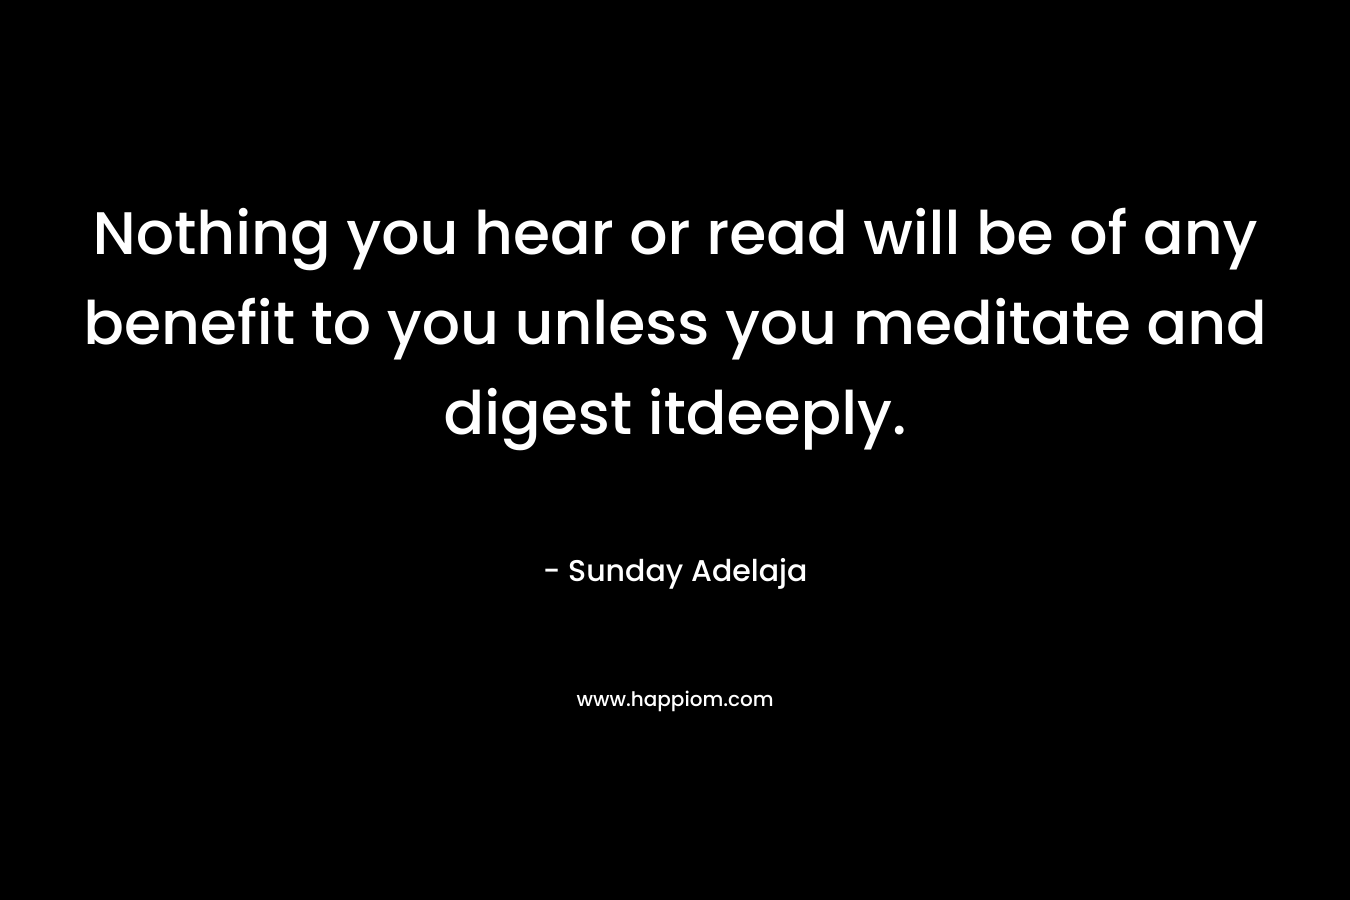 Nothing you hear or read will be of any benefit to you unless you meditate and digest itdeeply.